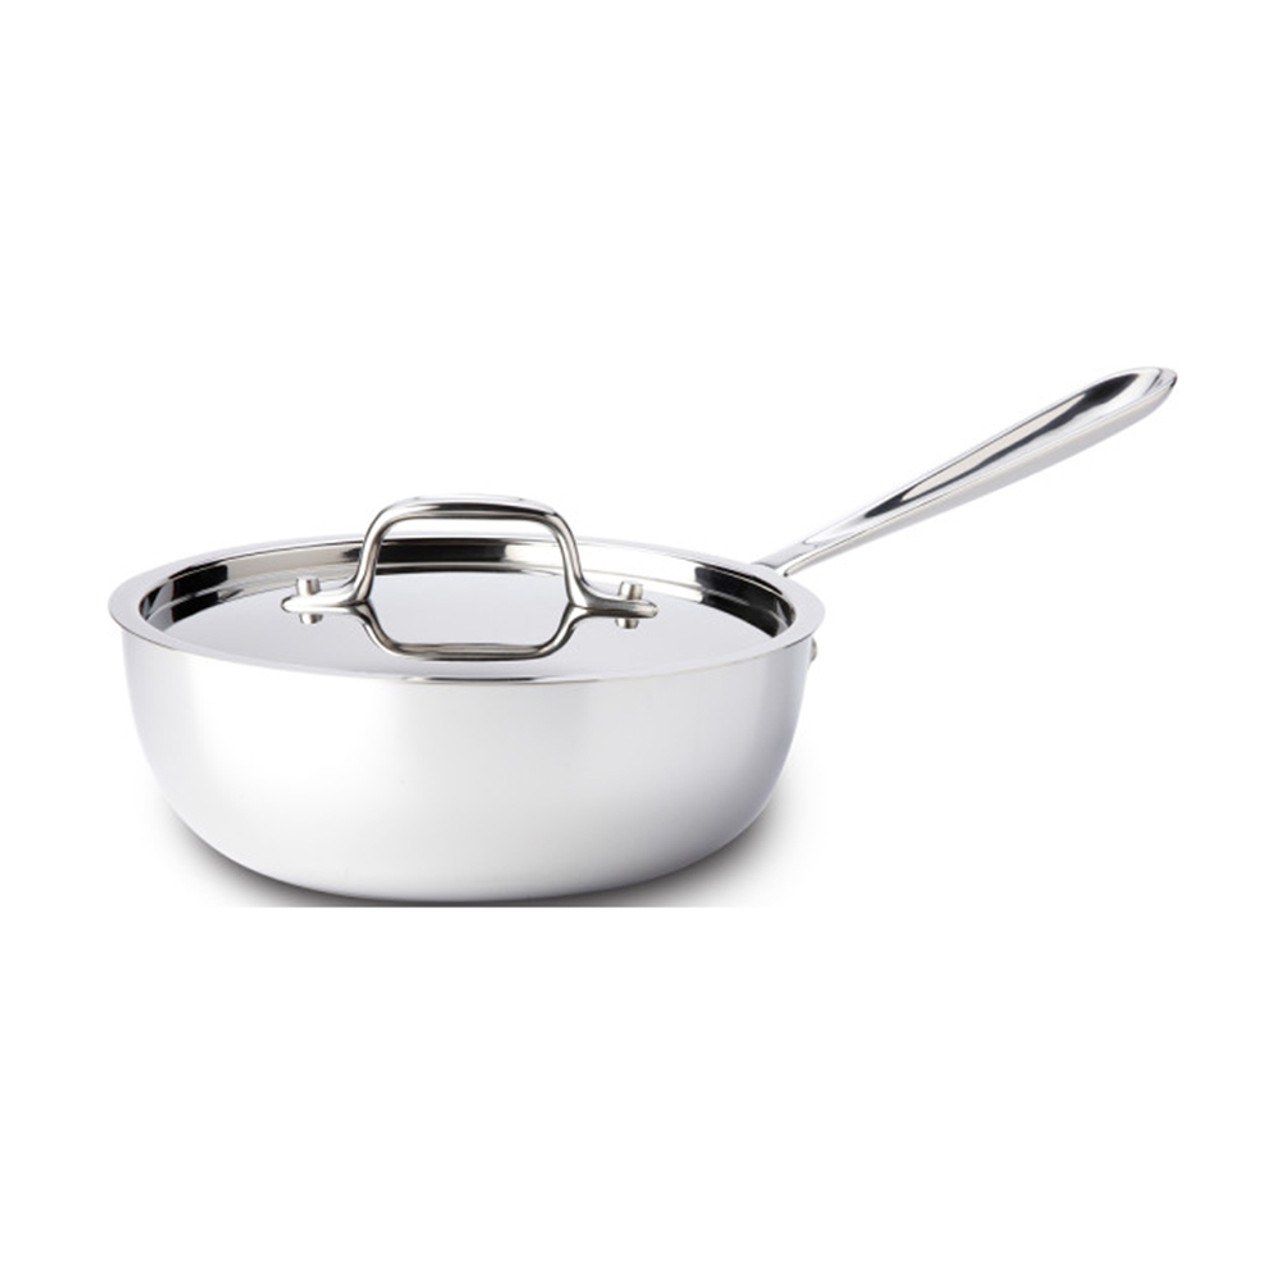 ALL-CLAD D3 STAINLESS STEEL OPEN SAUCIER WITH WHISK, 2 QT. - Leo Edit